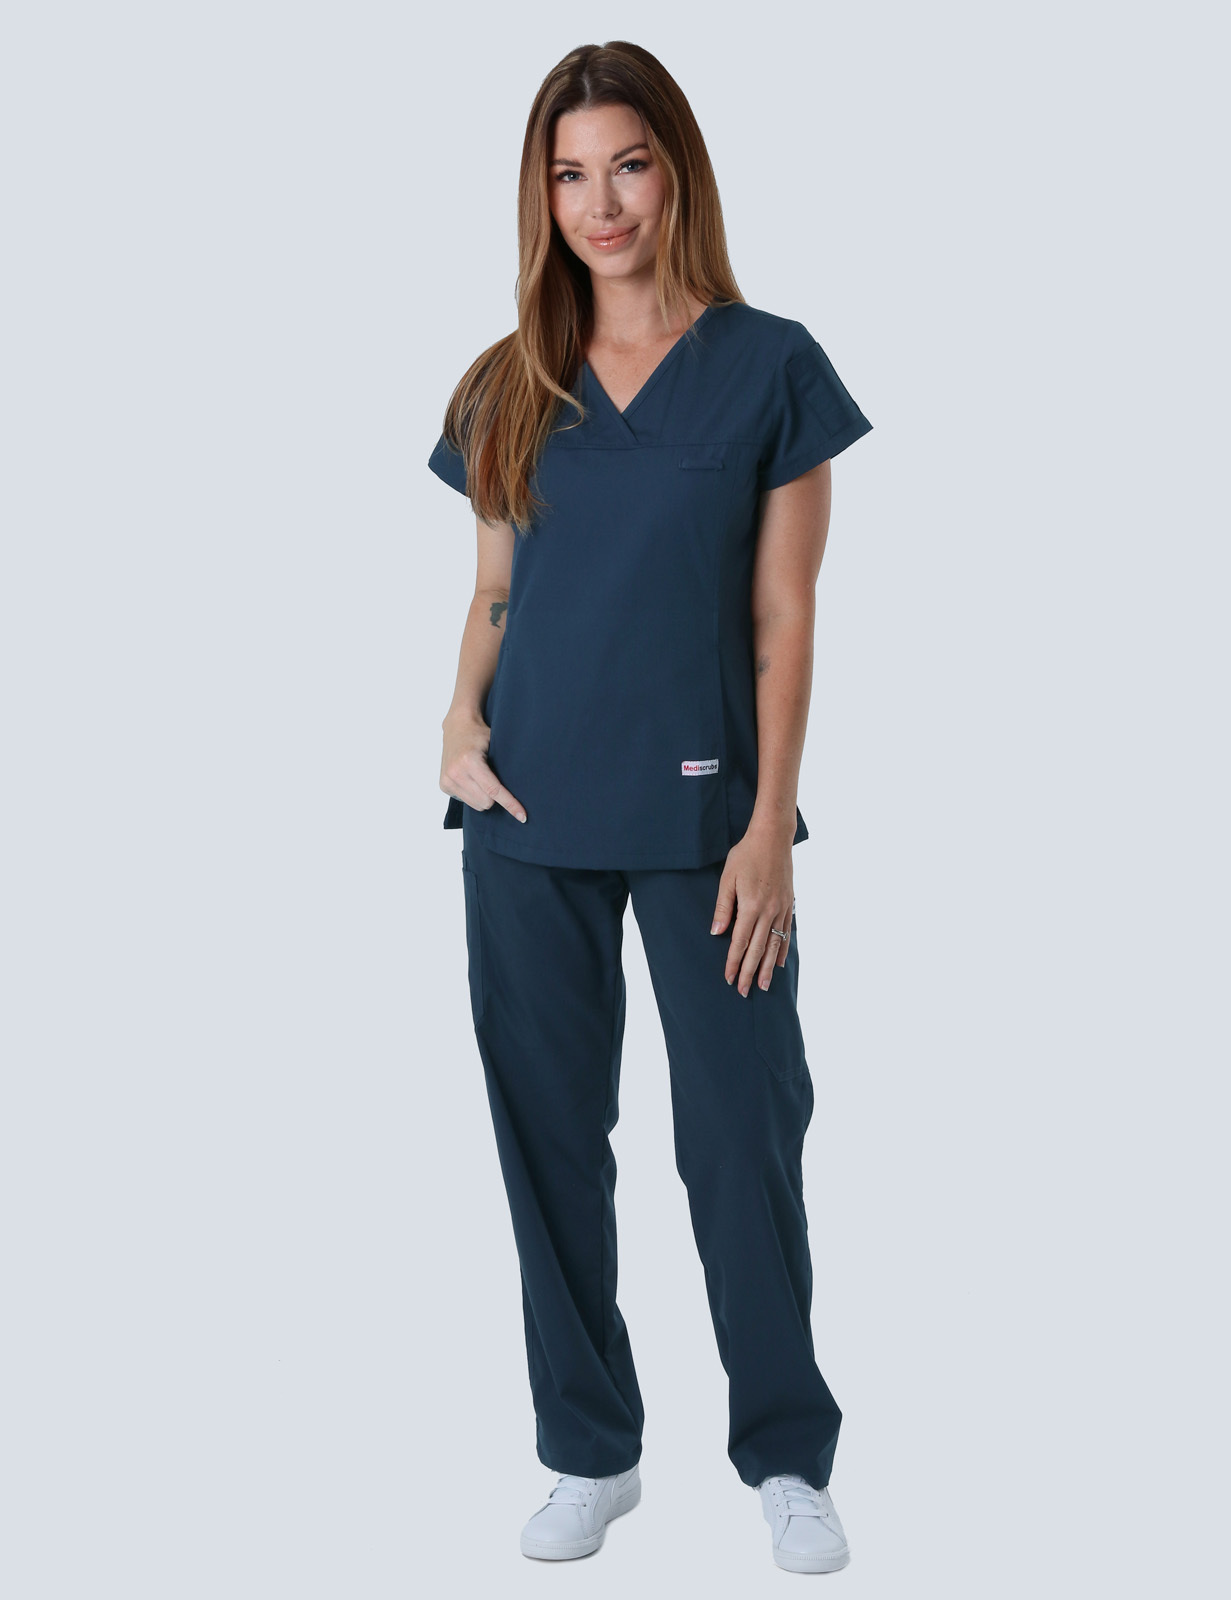 Women's Fit Solid Scrub Top - Navy - 3